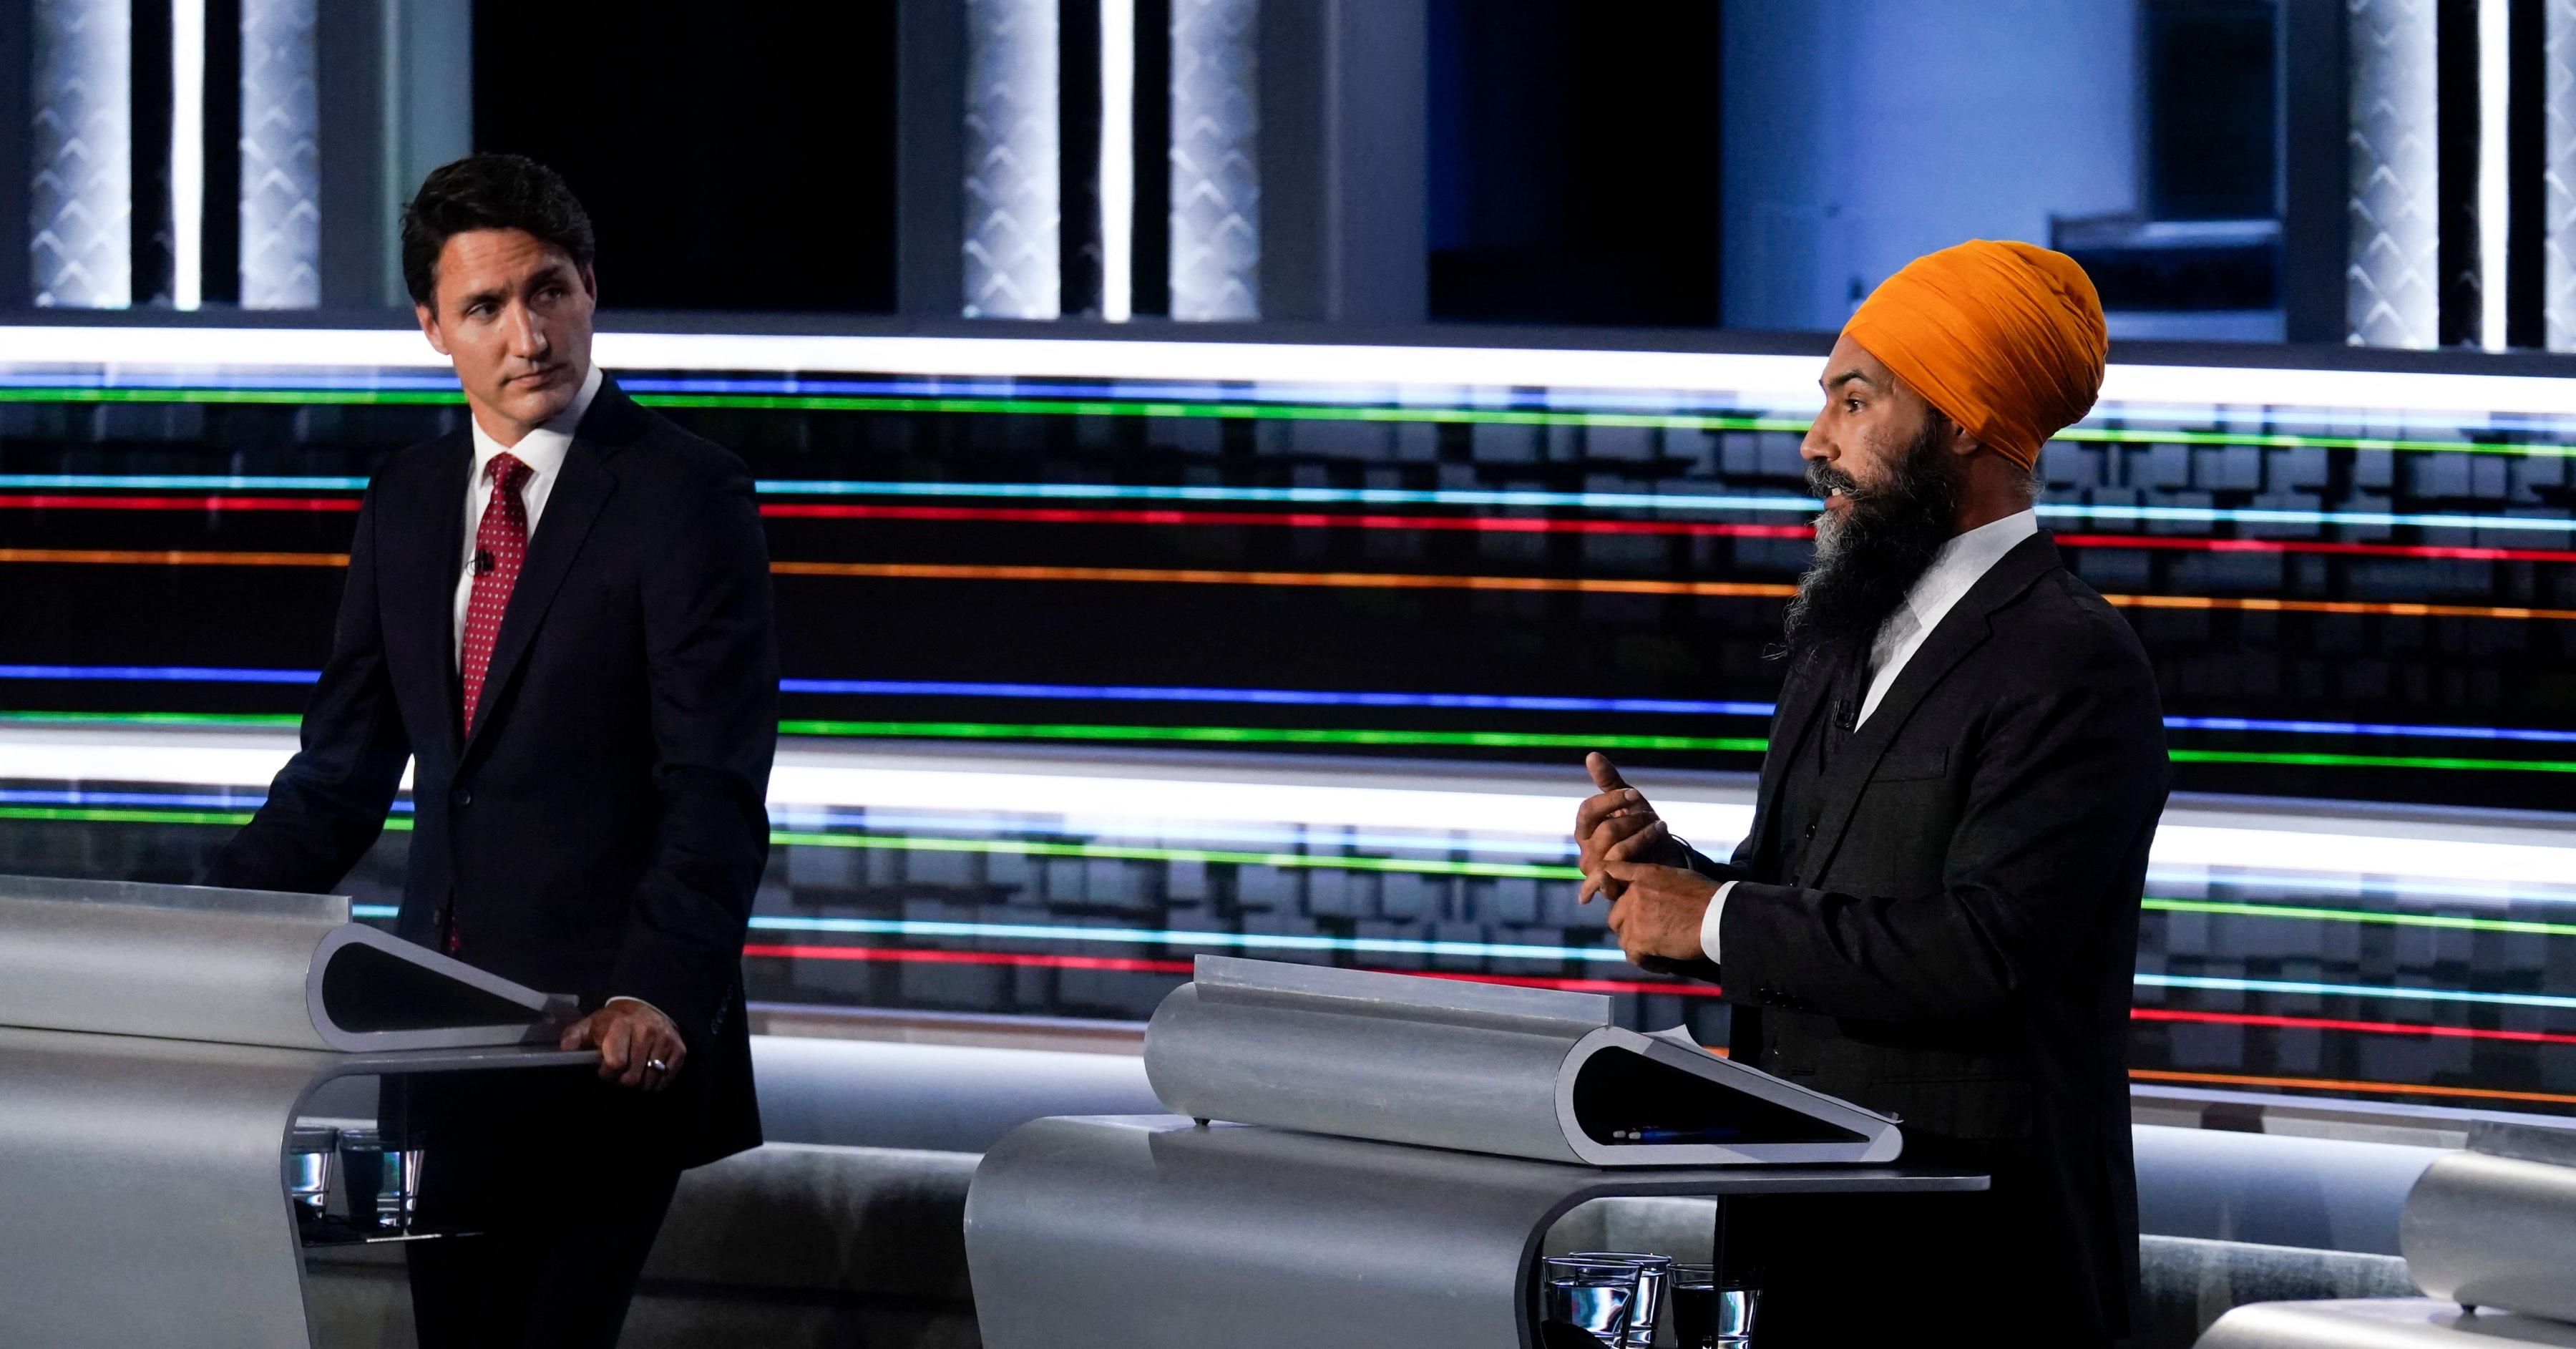 Canadian Prime Minister Justin Trudeau and NDP leader Jagmeet Singh